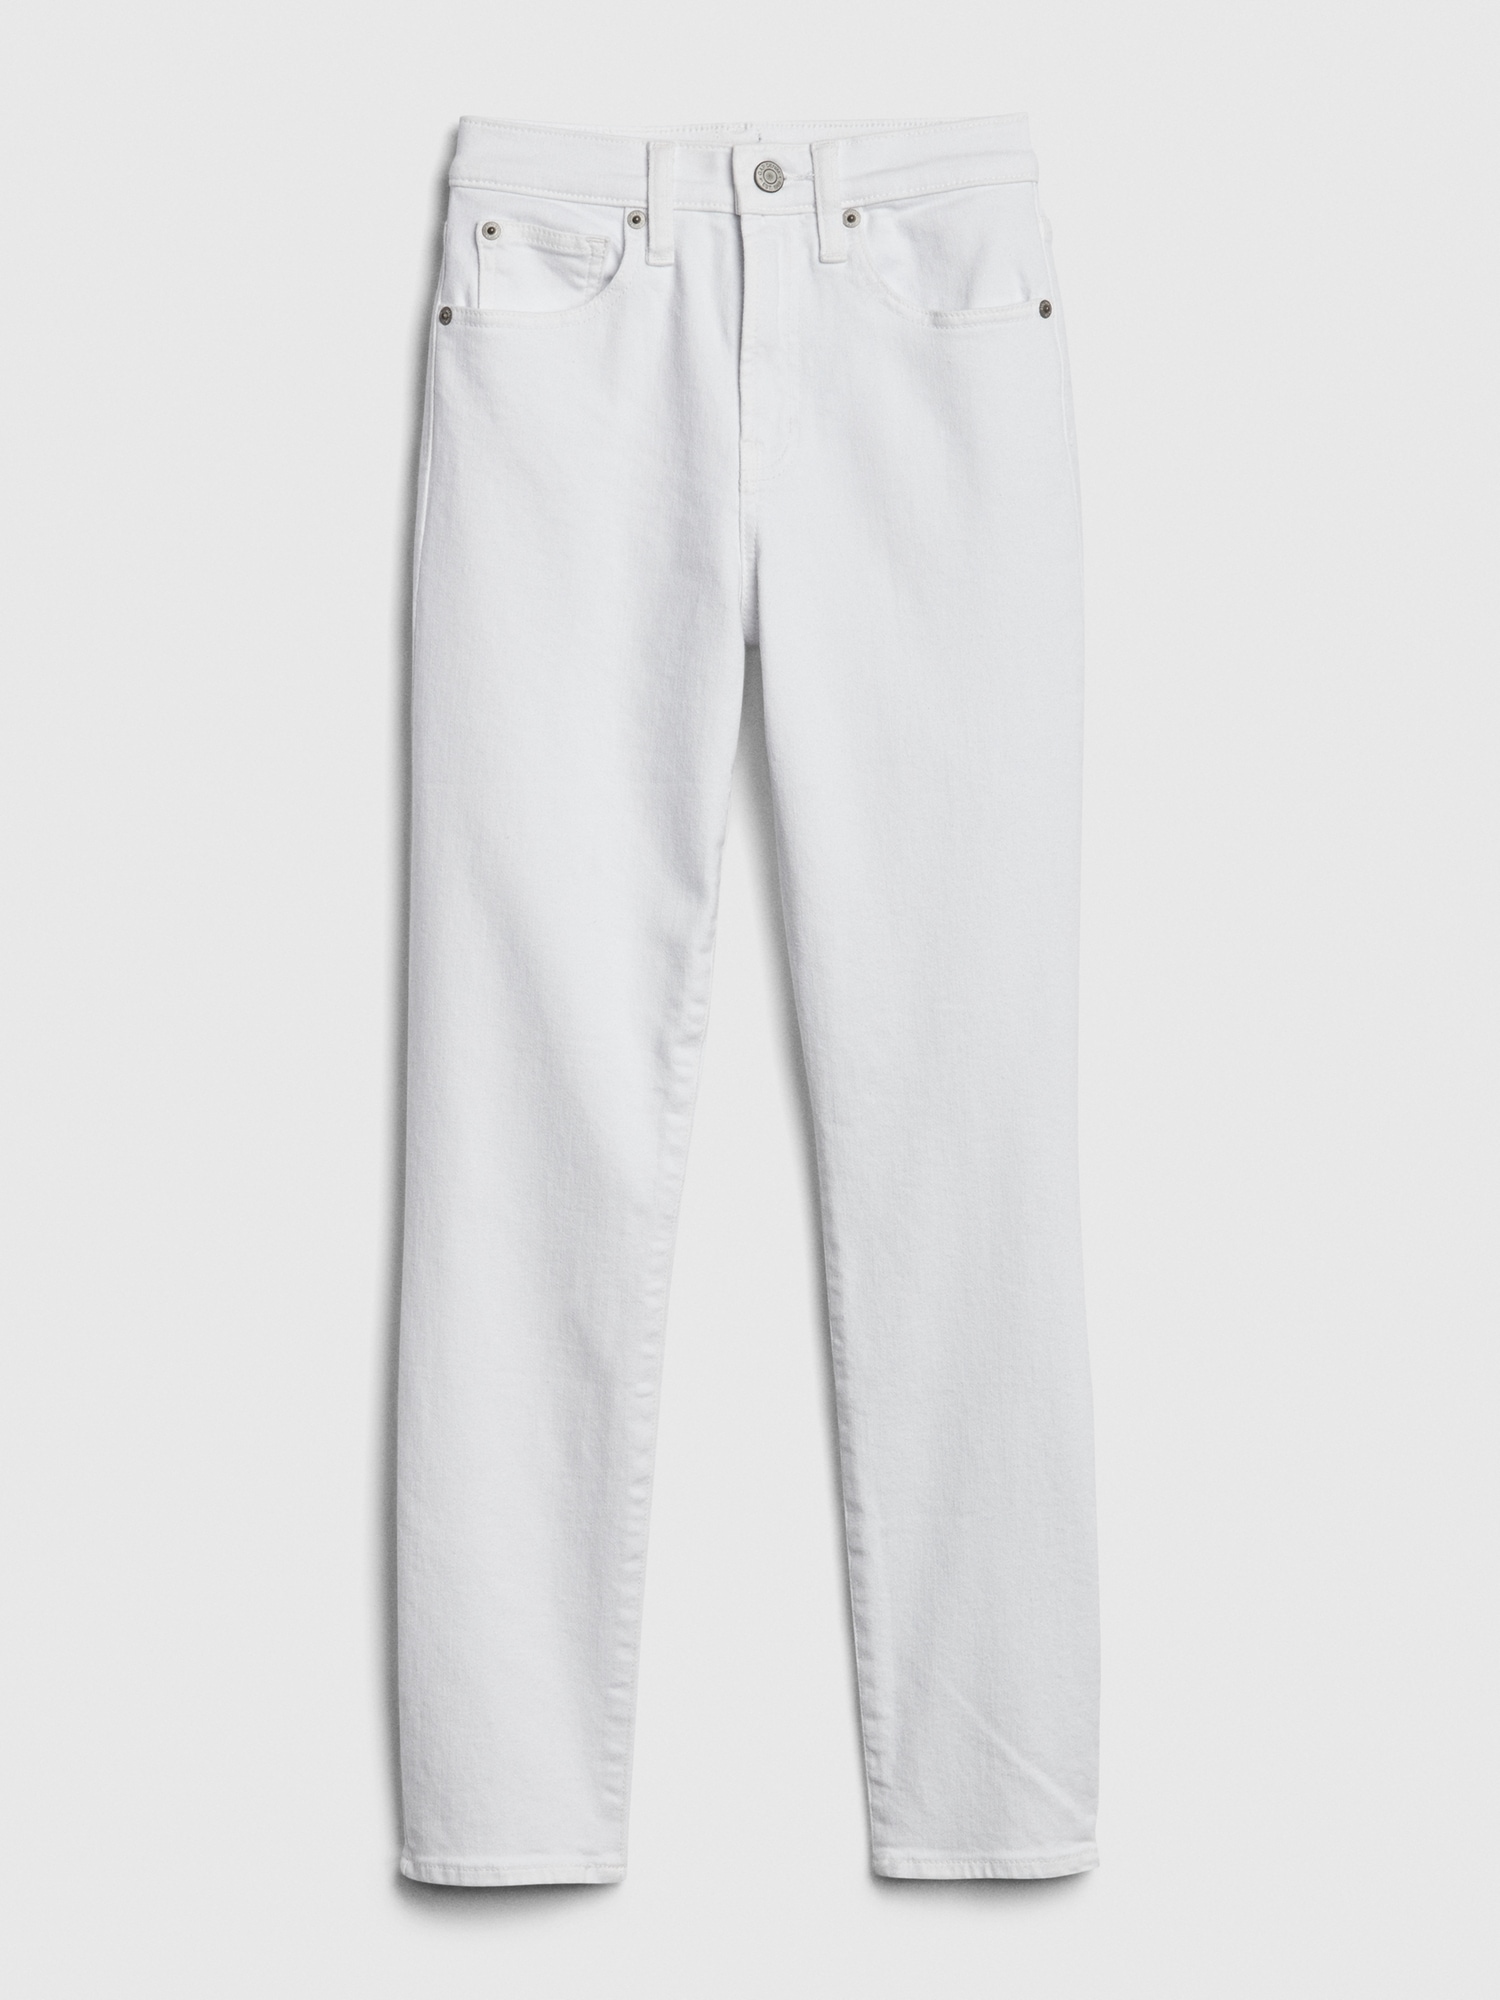 High Rise True Skinny Ankle Jeans | Gap